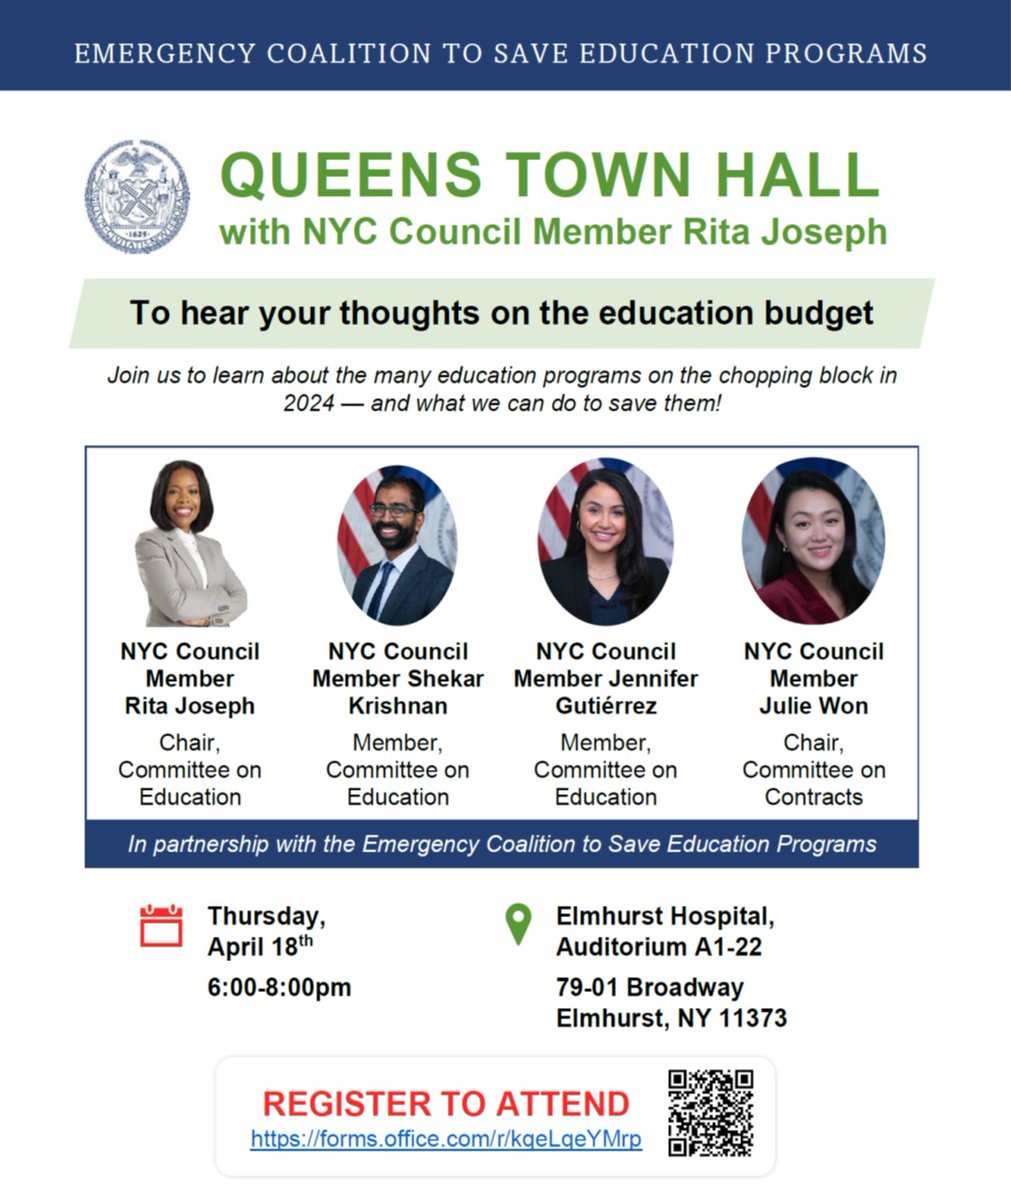 The @nyccouncil is fighting hard for working families, from fully funded schools to expanded preschool, afterschool, & summer programs for kids. Join us at this Town Hall on Thursday & tell us what you need!